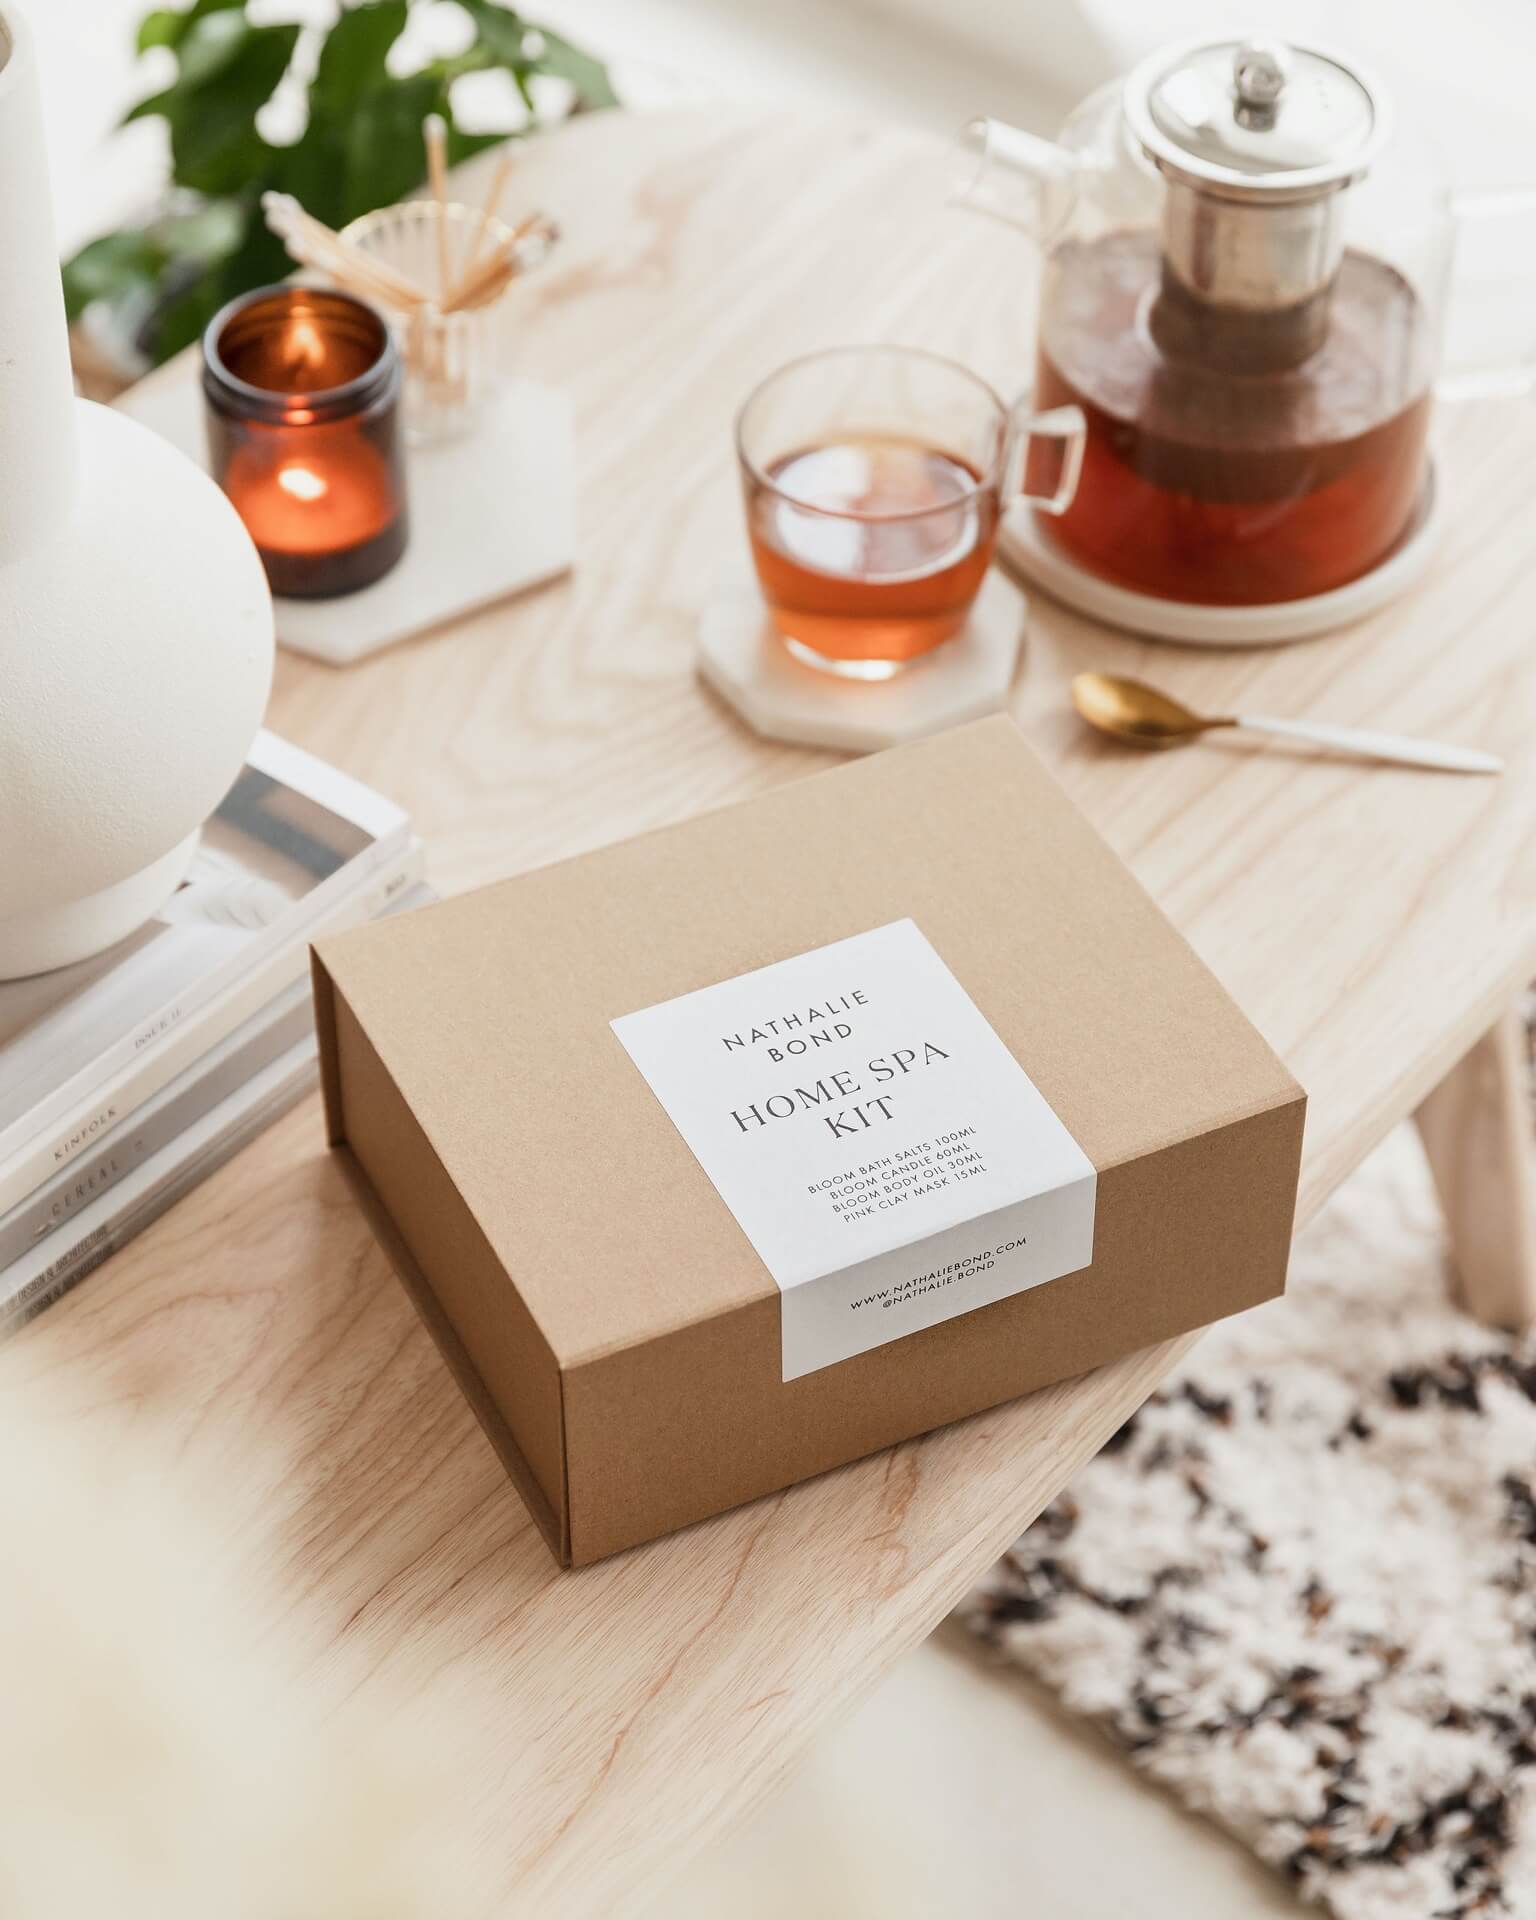 A gift box for an at home spa by natural skincare brand Nathalie Bond. 